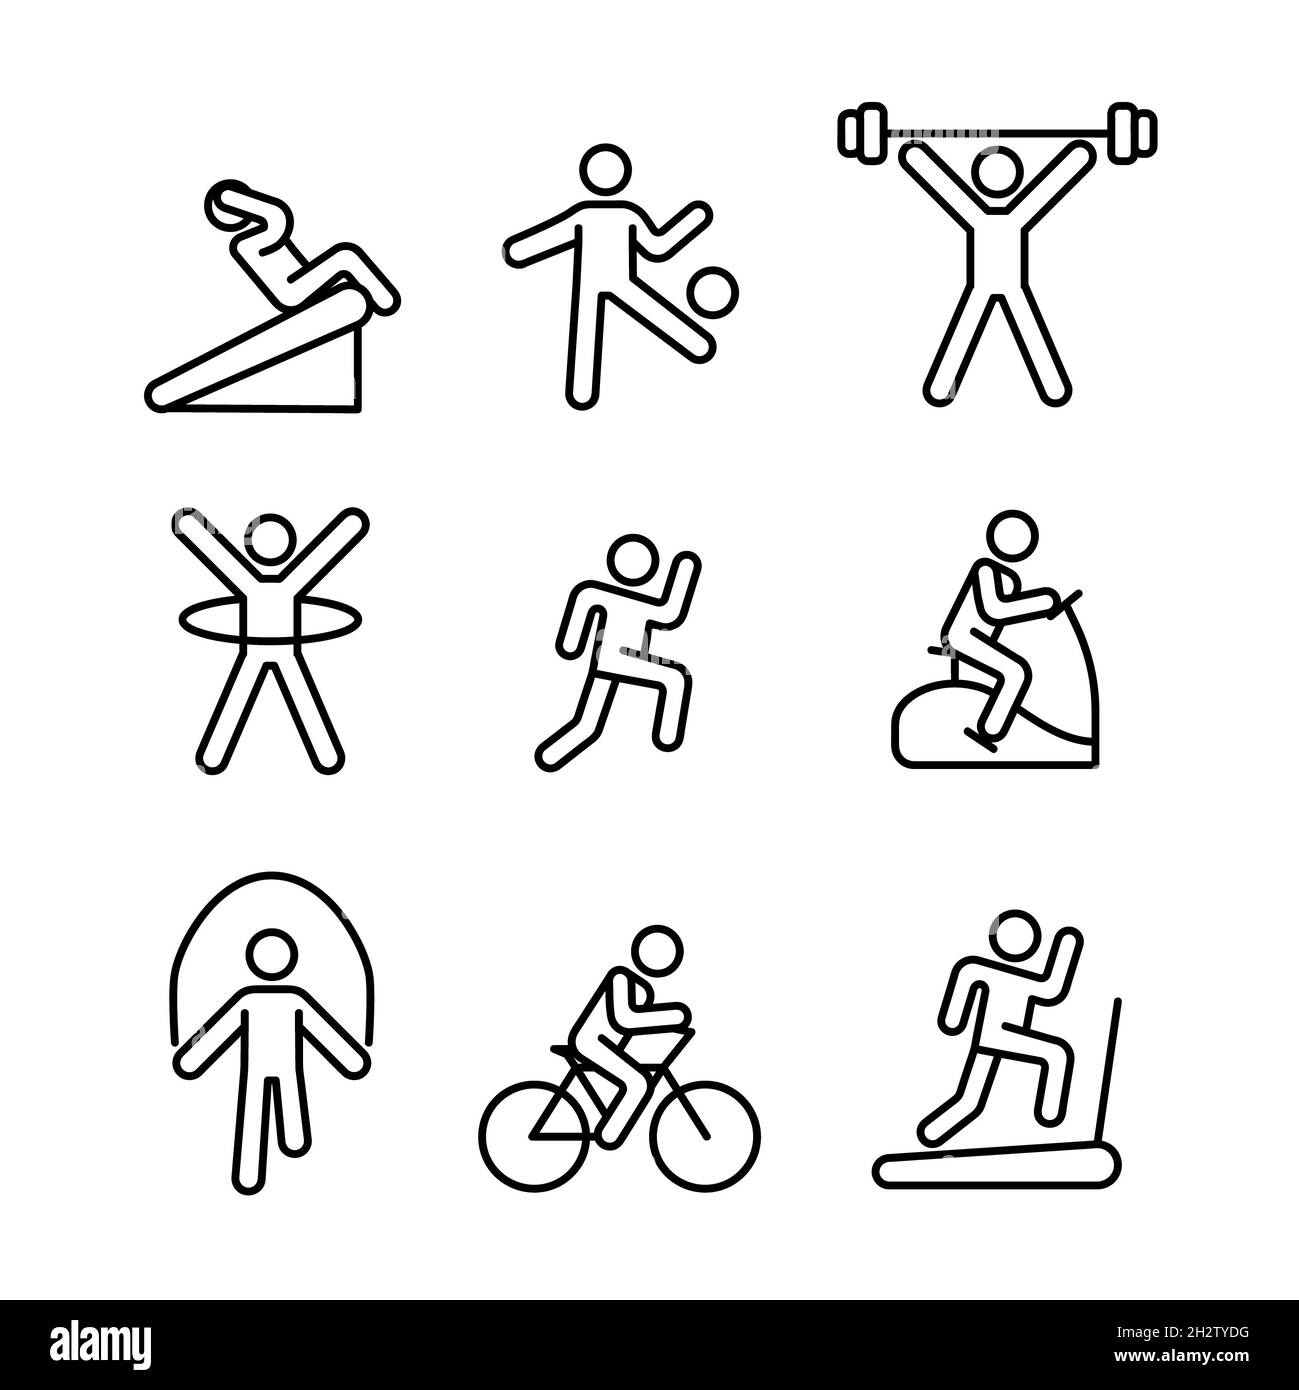 https://c8.alamy.com/comp/2H2TYDG/healhty-fitness-icon-flat-sport-pictogram-for-web-line-stroke-simple-gym-and-diet-symbols-in-stack-isolated-on-white-background-outline-icon-vecto-2H2TYDG.jpg